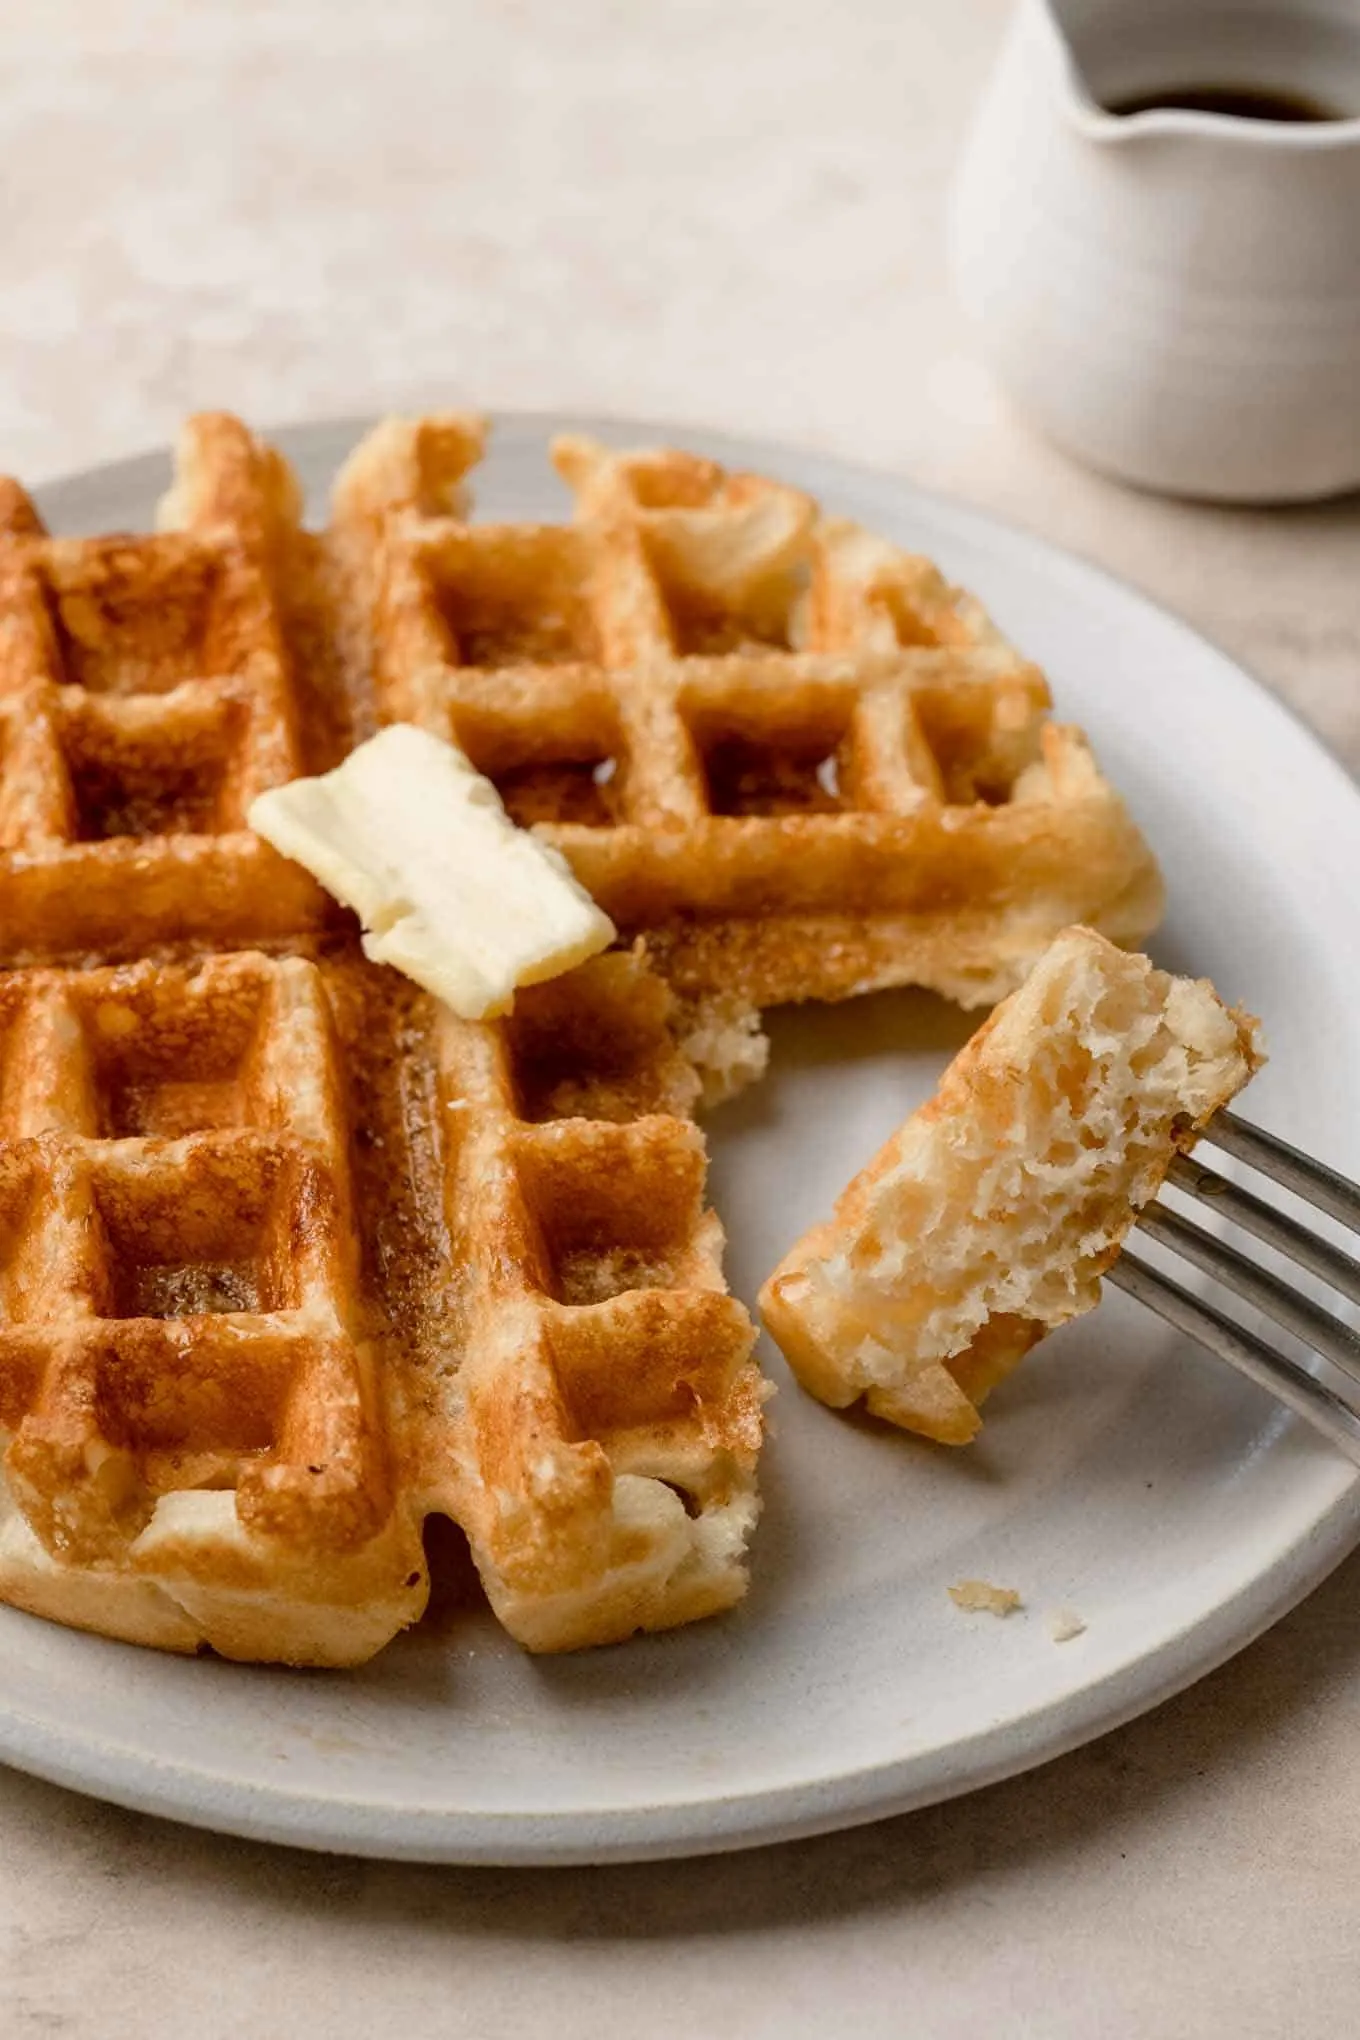 a piece of vegan Belgian waffle speared onto a fork showing the texture of the waffle